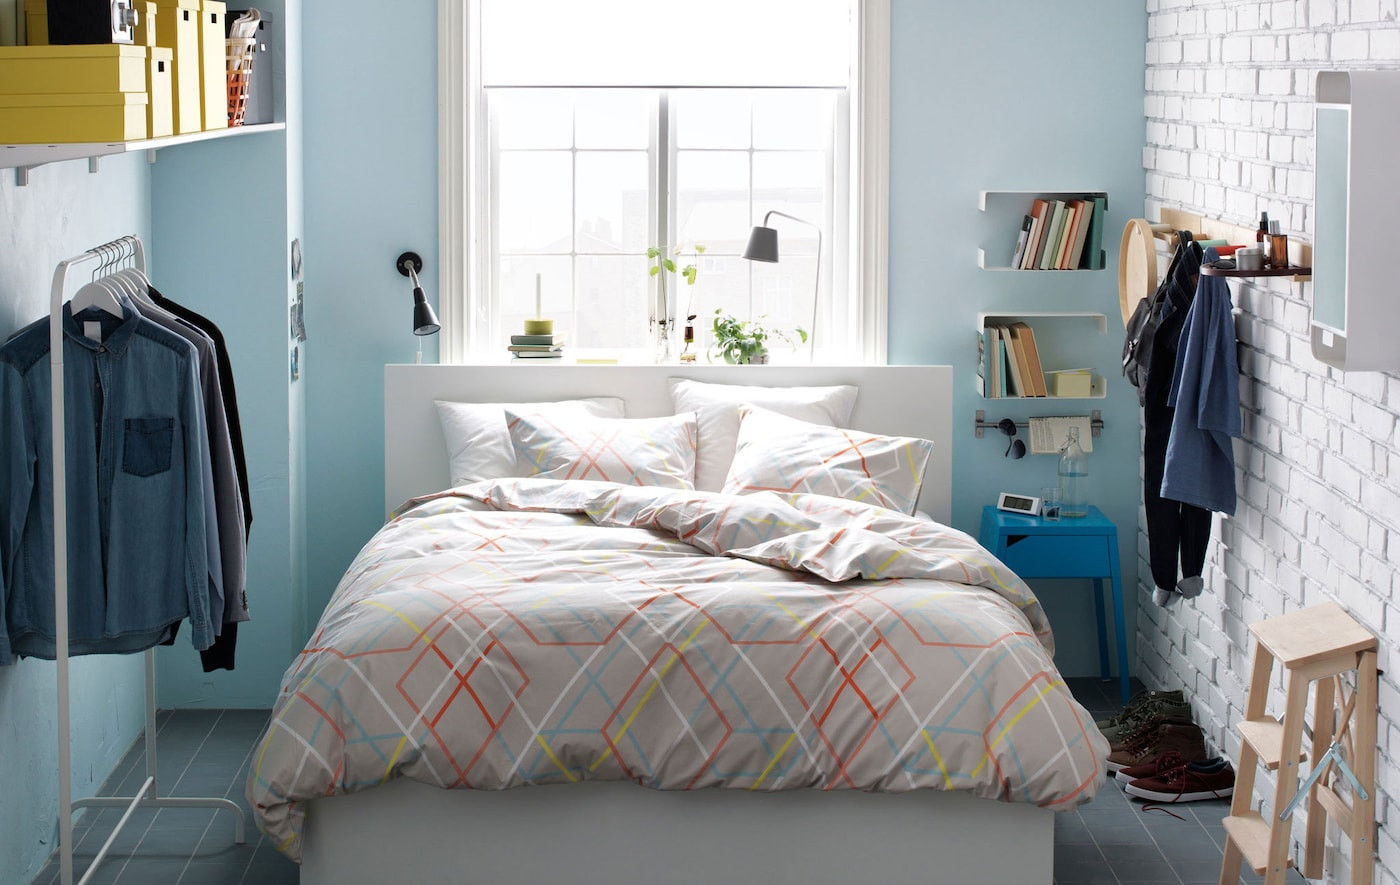 Ikea Small Bedroom Ideas
 Smart ideas for clothes storage in a small space IKEA